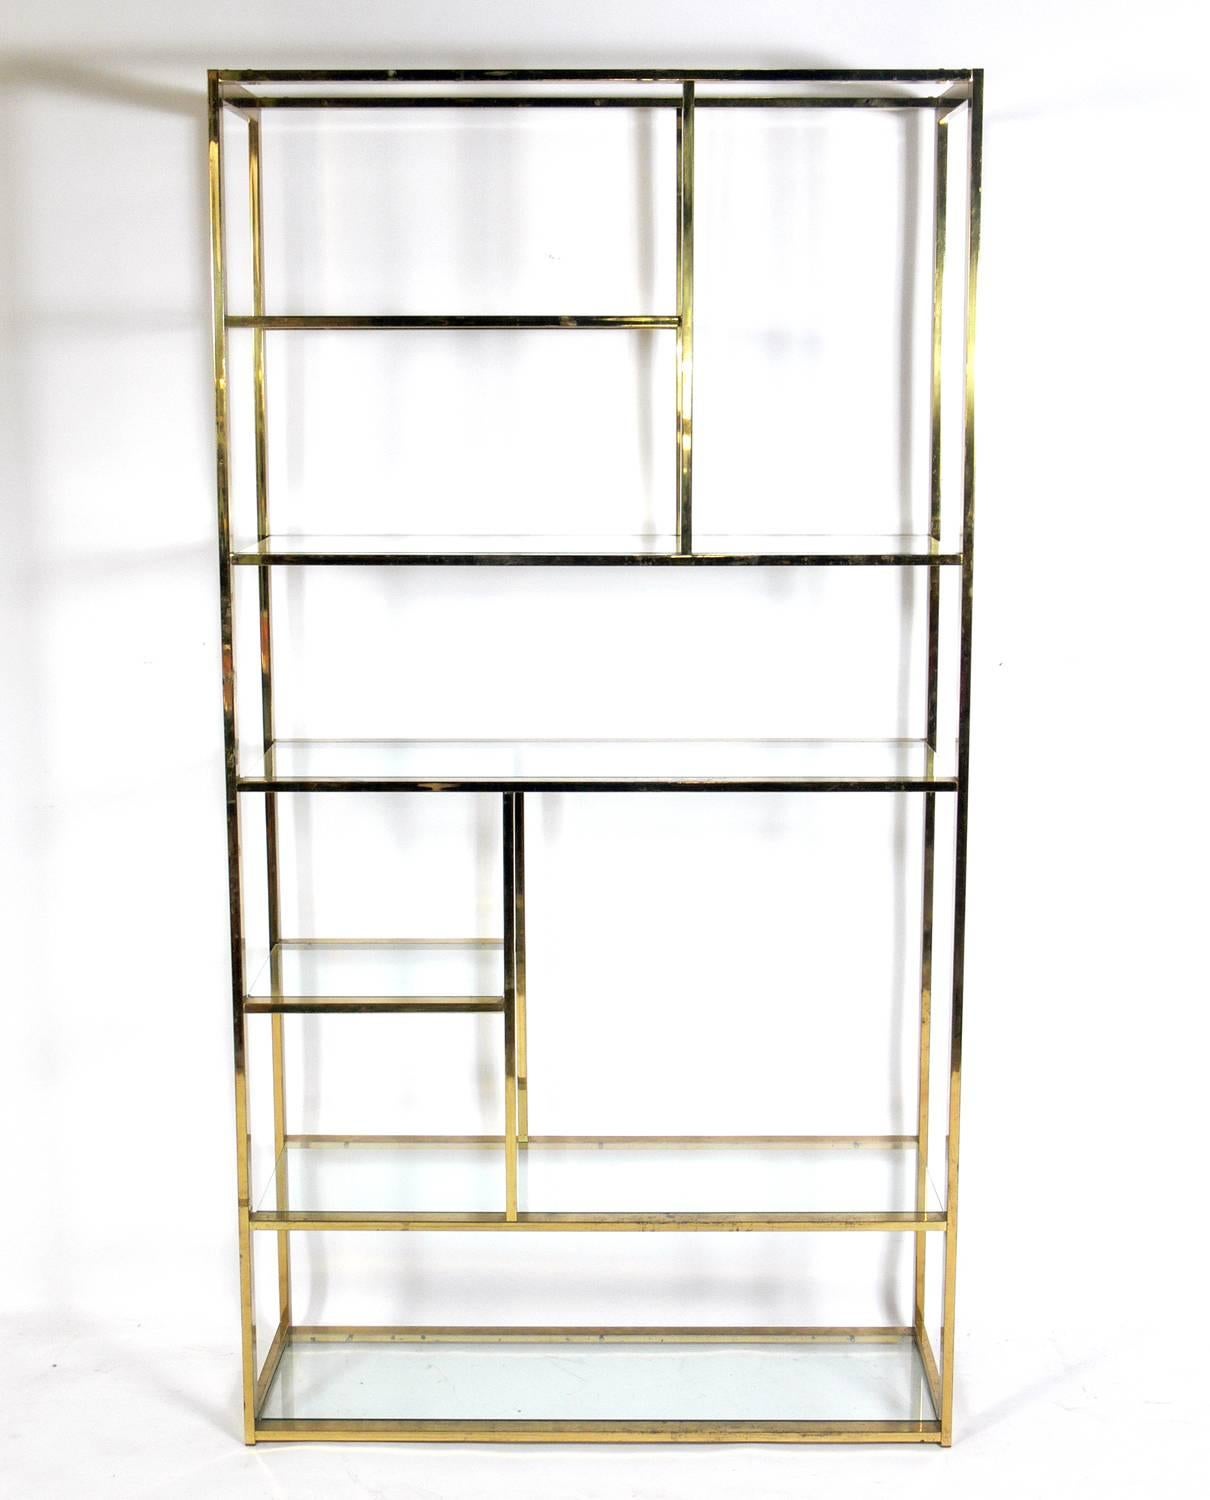 Brass étagère, bookshelf or vitrine, in the manner of Milo Baughman, American, circa 1960s. Retains warm original patina with age spotting and wear.